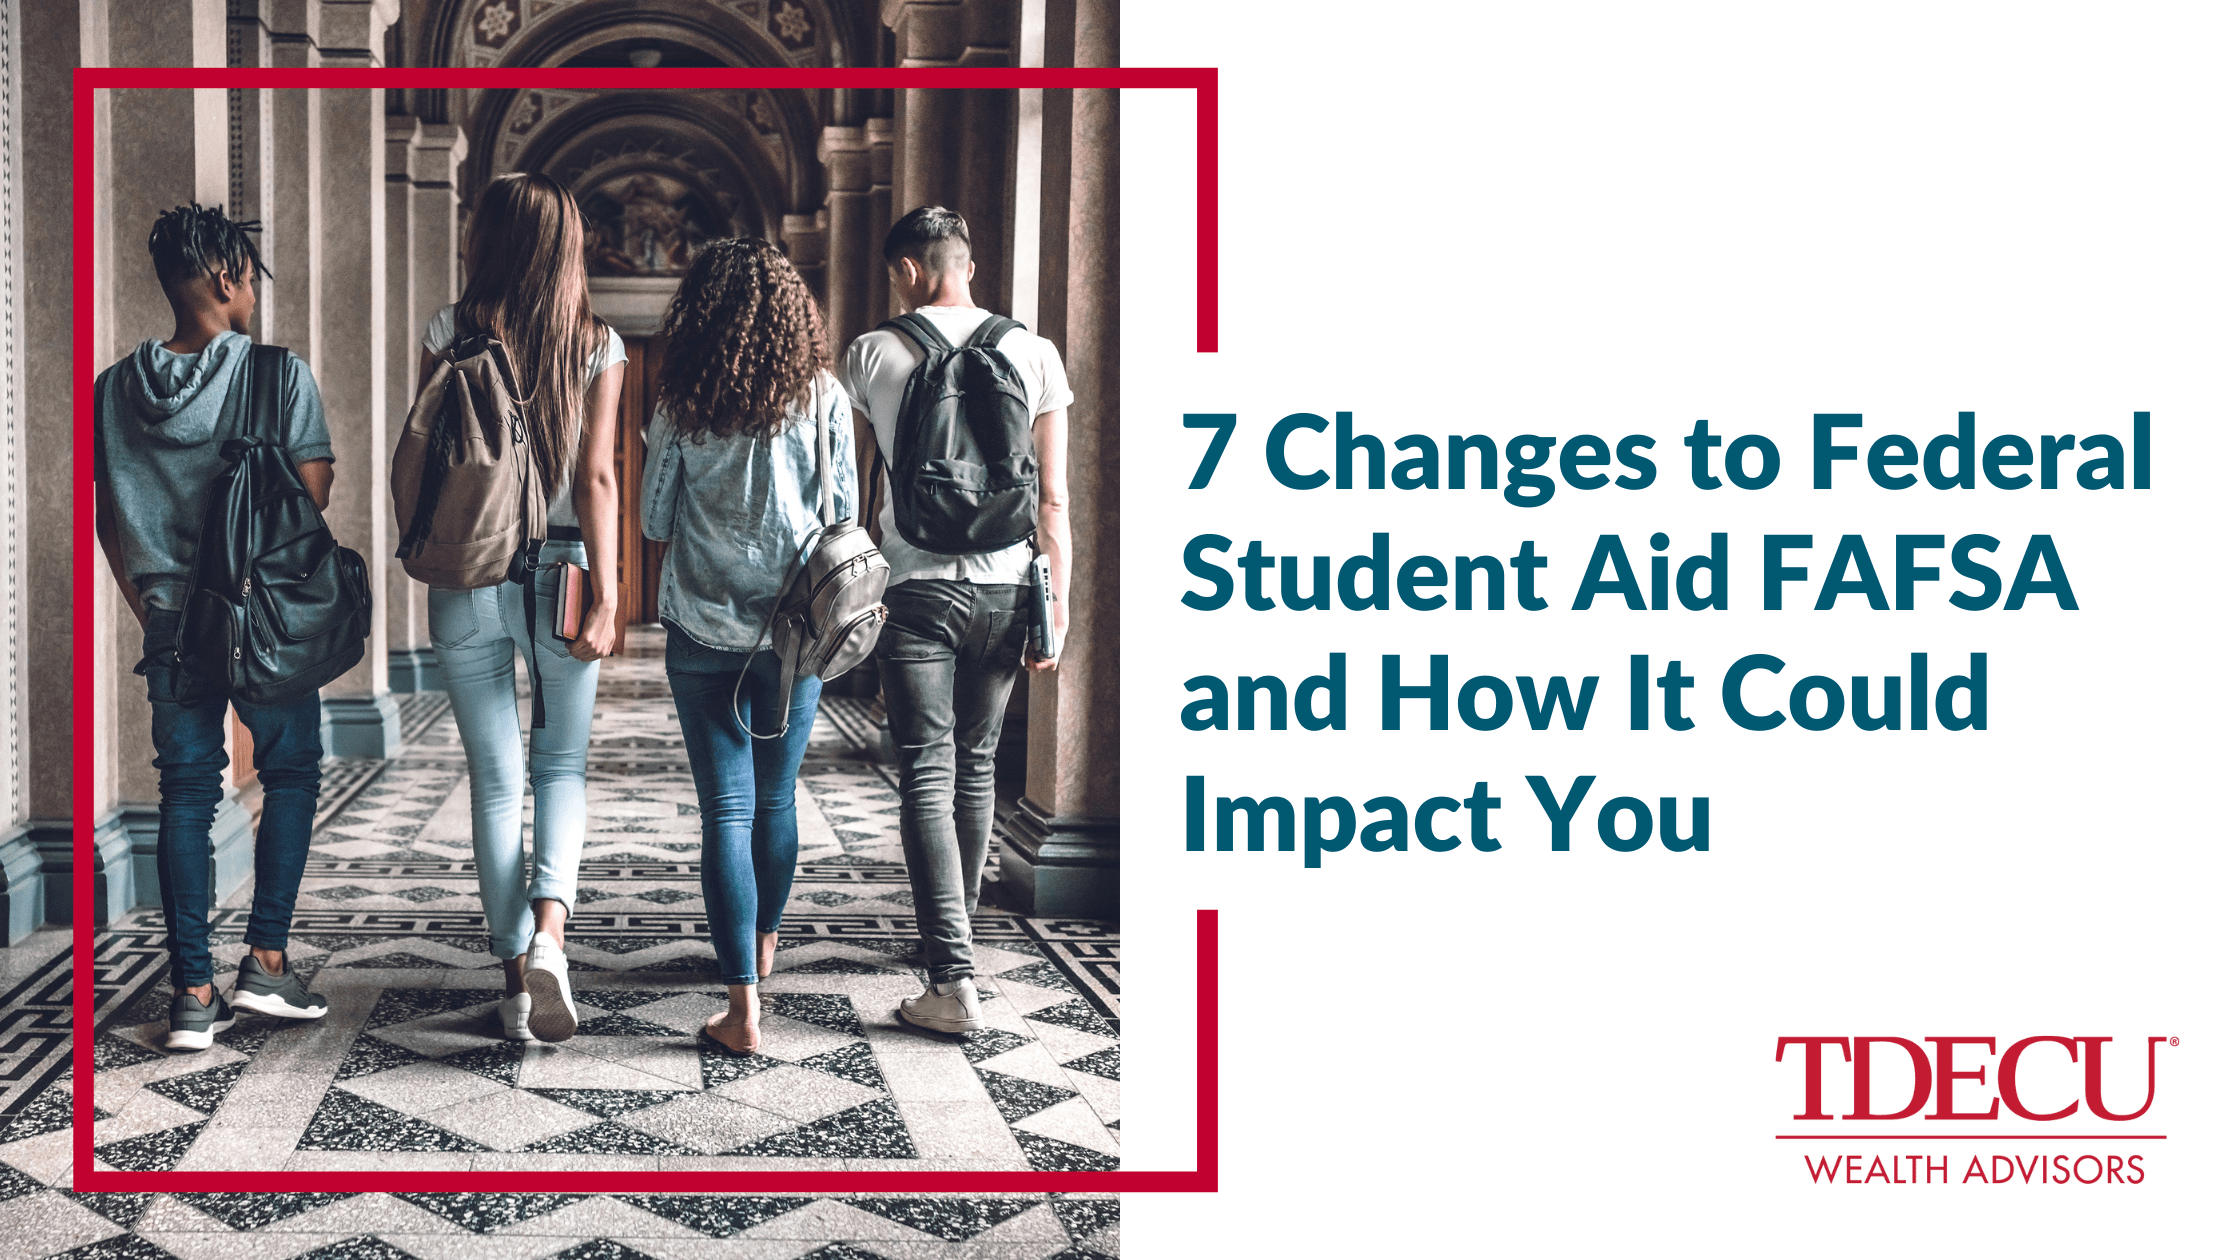 7 Changes to the FAFSA and How They Could Impact You